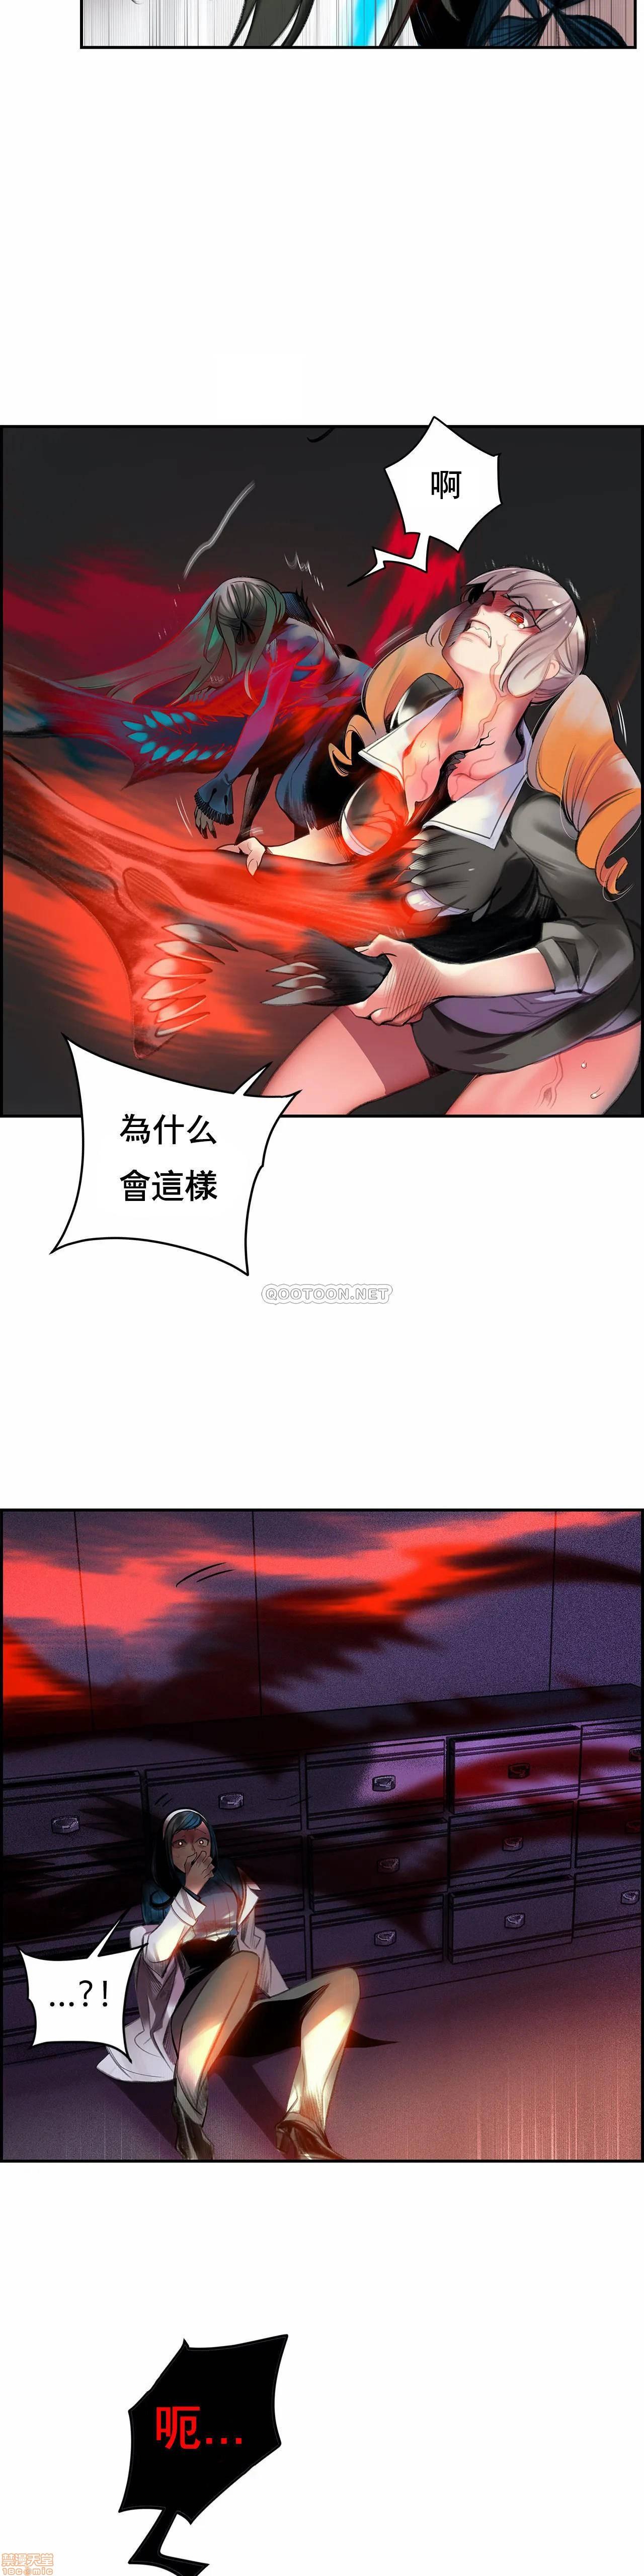 [Juder] Lilith`s Cord (第二季) Ch.77-93 end [Chinese] 72